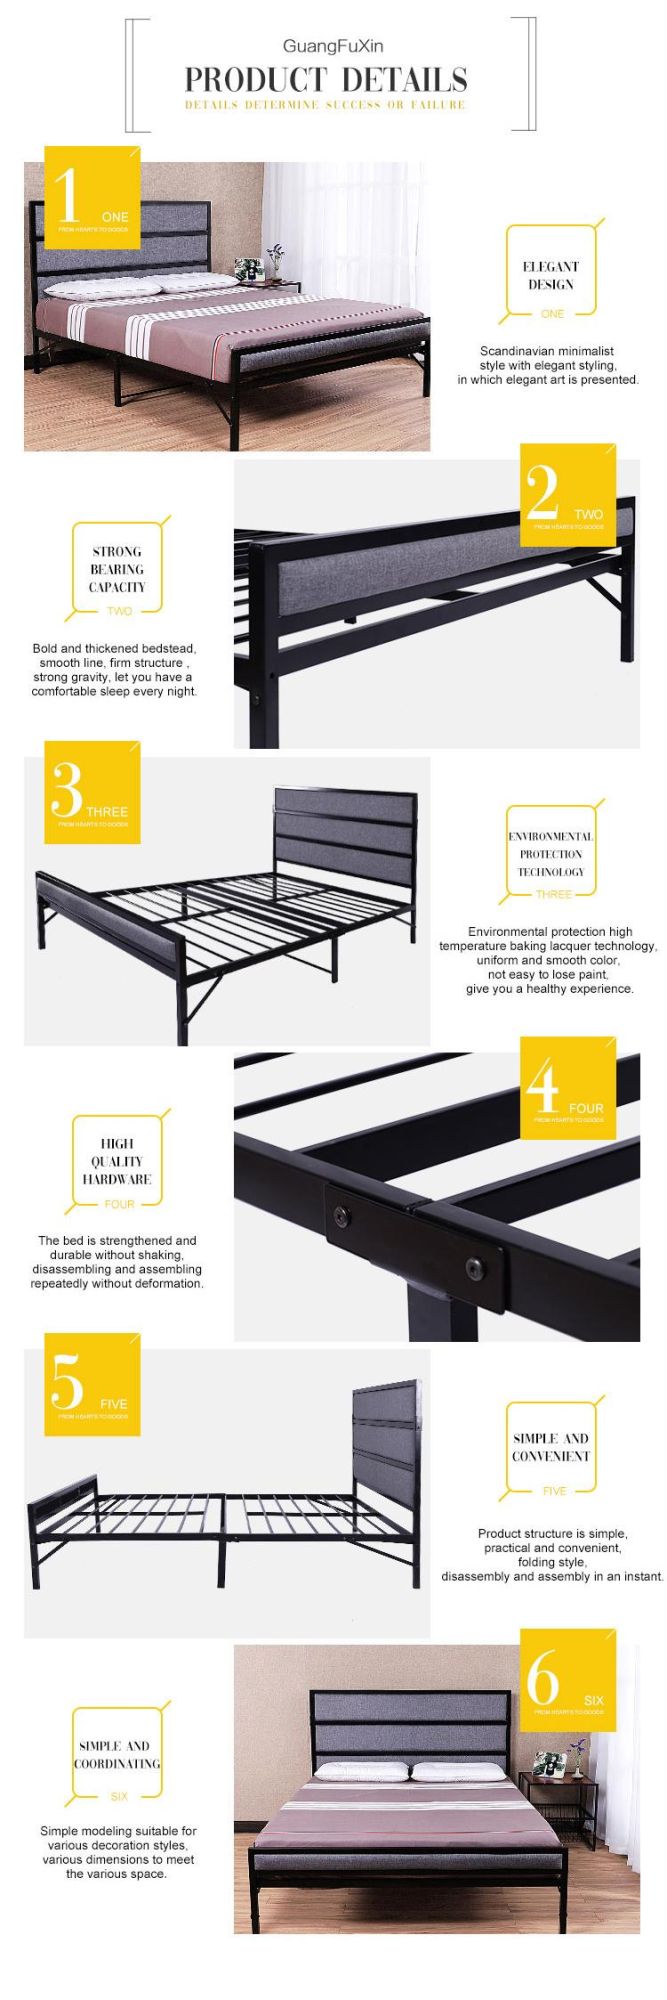 Latest Designs Bedroom Furniture Easy-Assemble Single Iron Folding Metal Bed for Sale